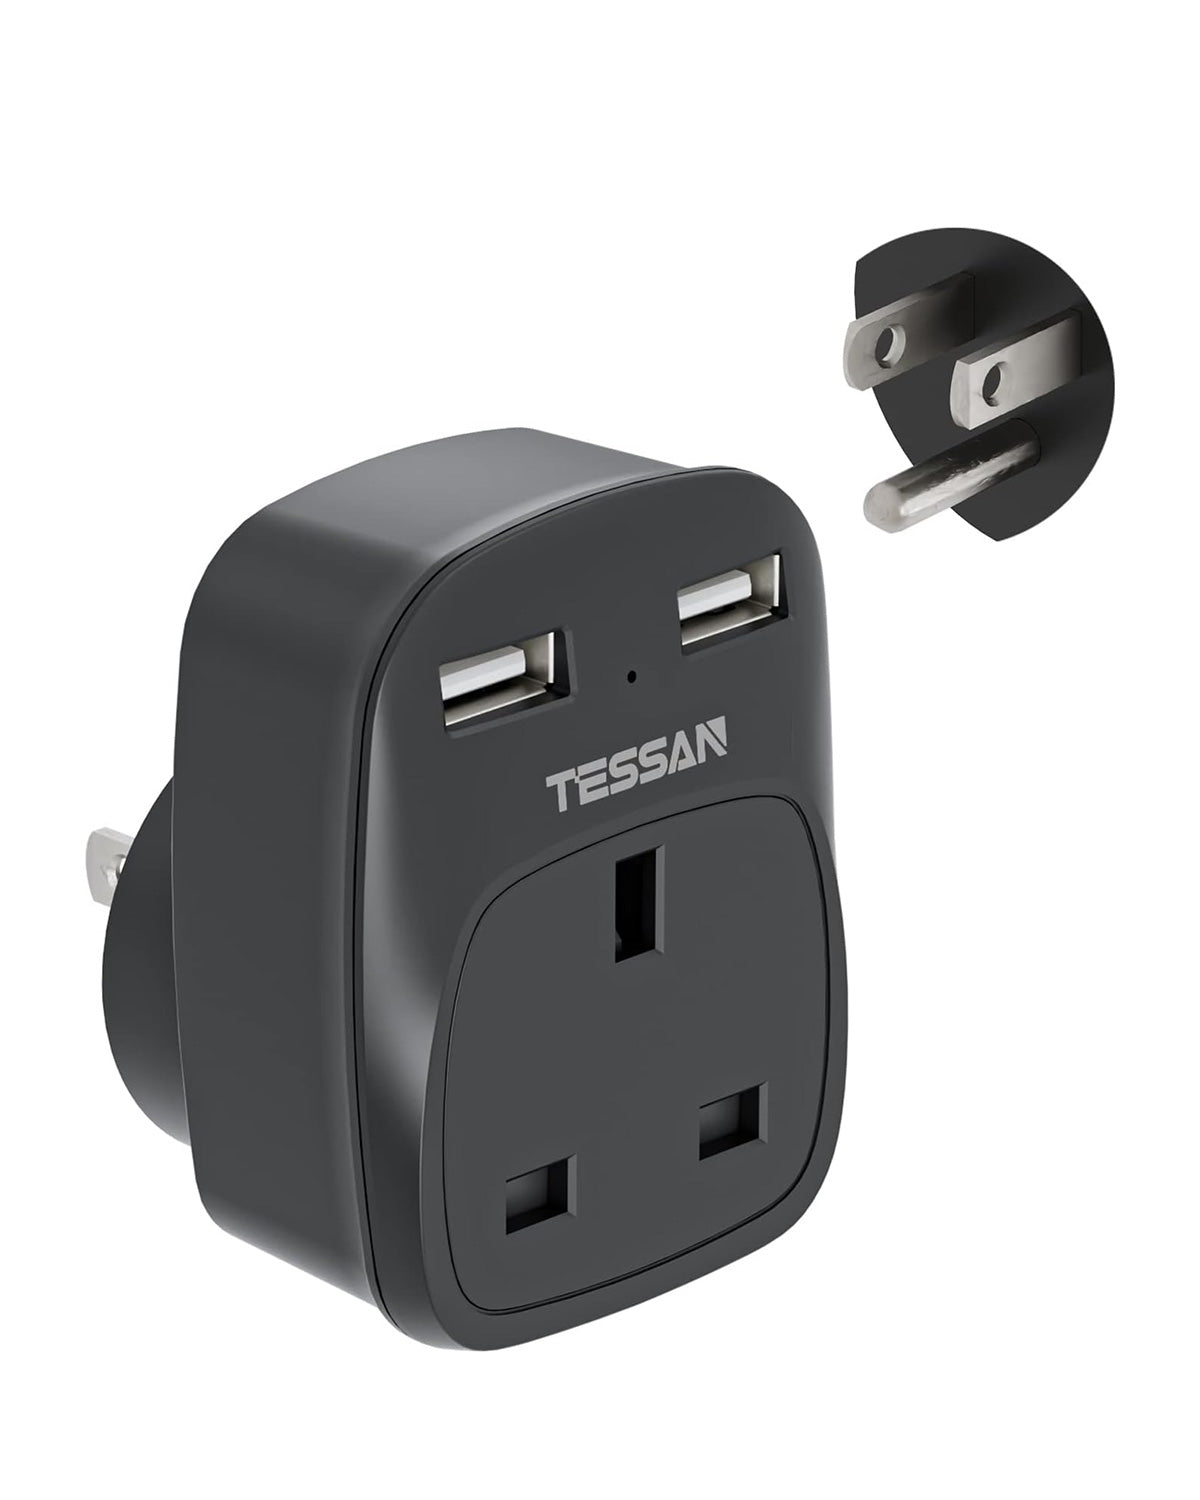 UK to USA 3 in 1 Travel Adapte with 2 USB